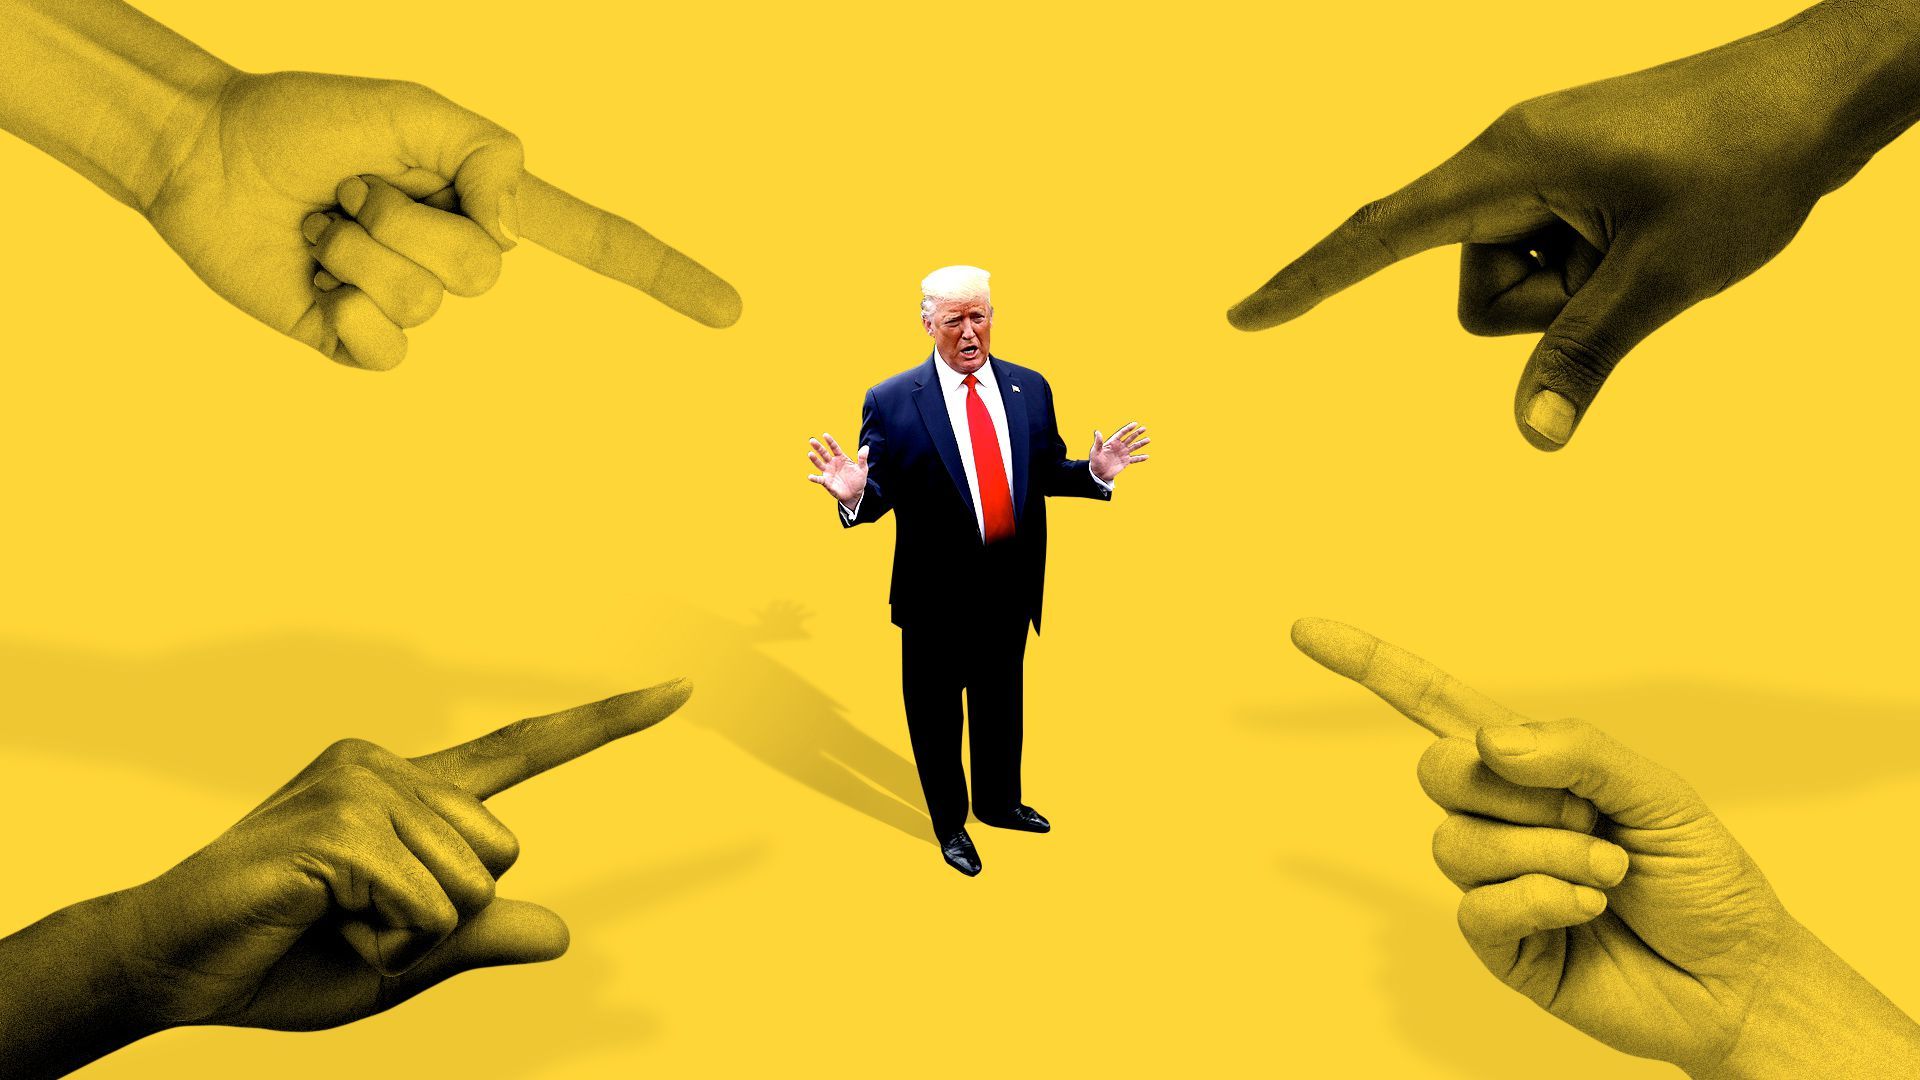 Illustration of President Trump with his hands raised surrounded by hands pointing fingers at him. 